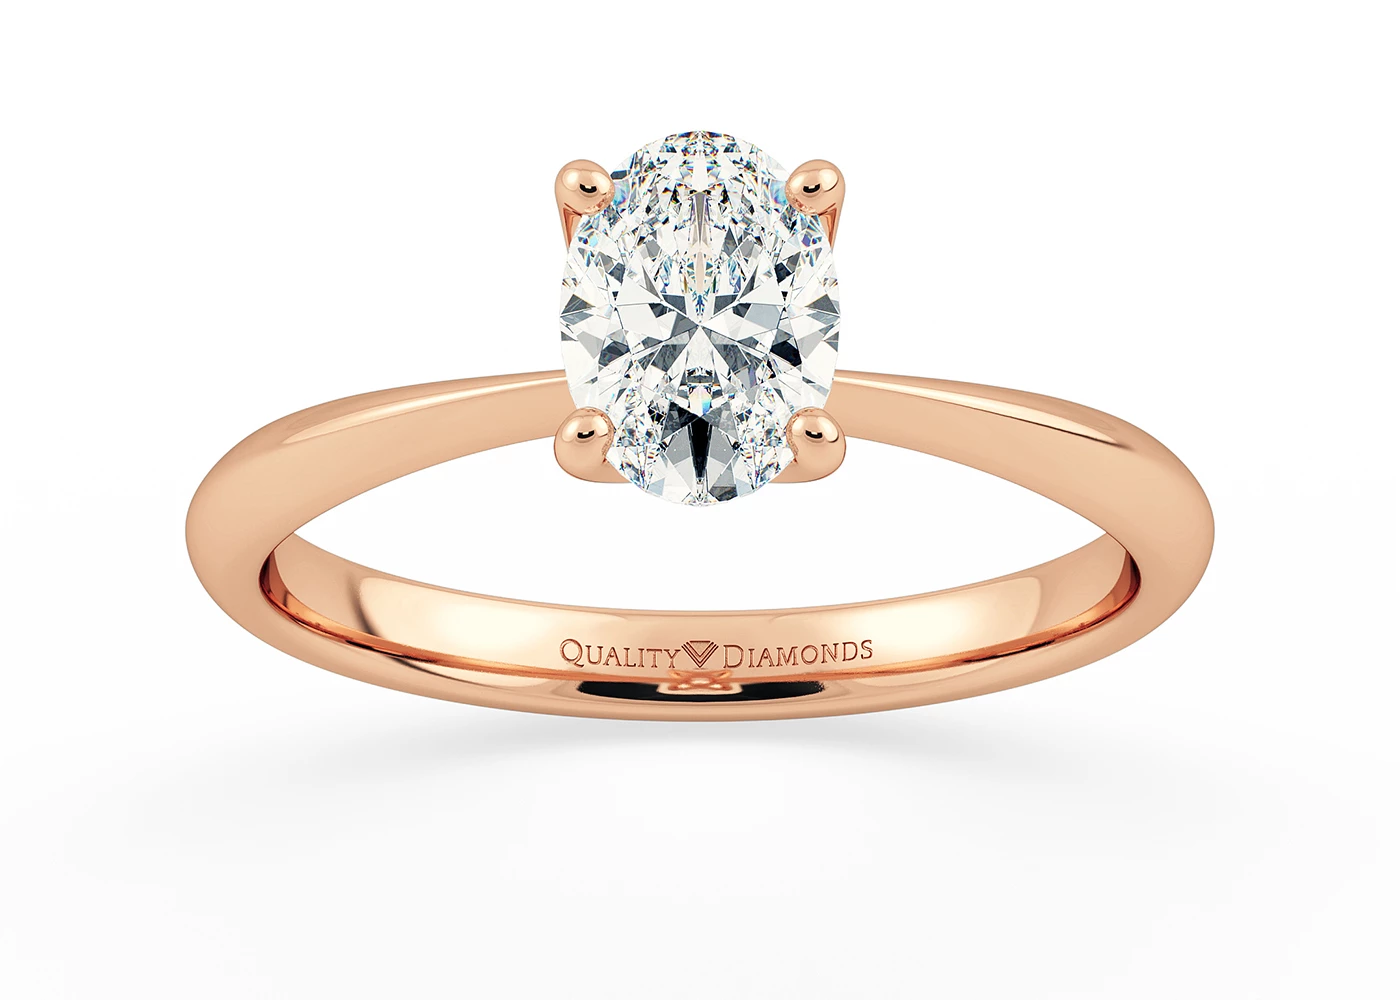 Half Carat Oval Solitaire Diamond Engagement Ring in 18K Rose Gold